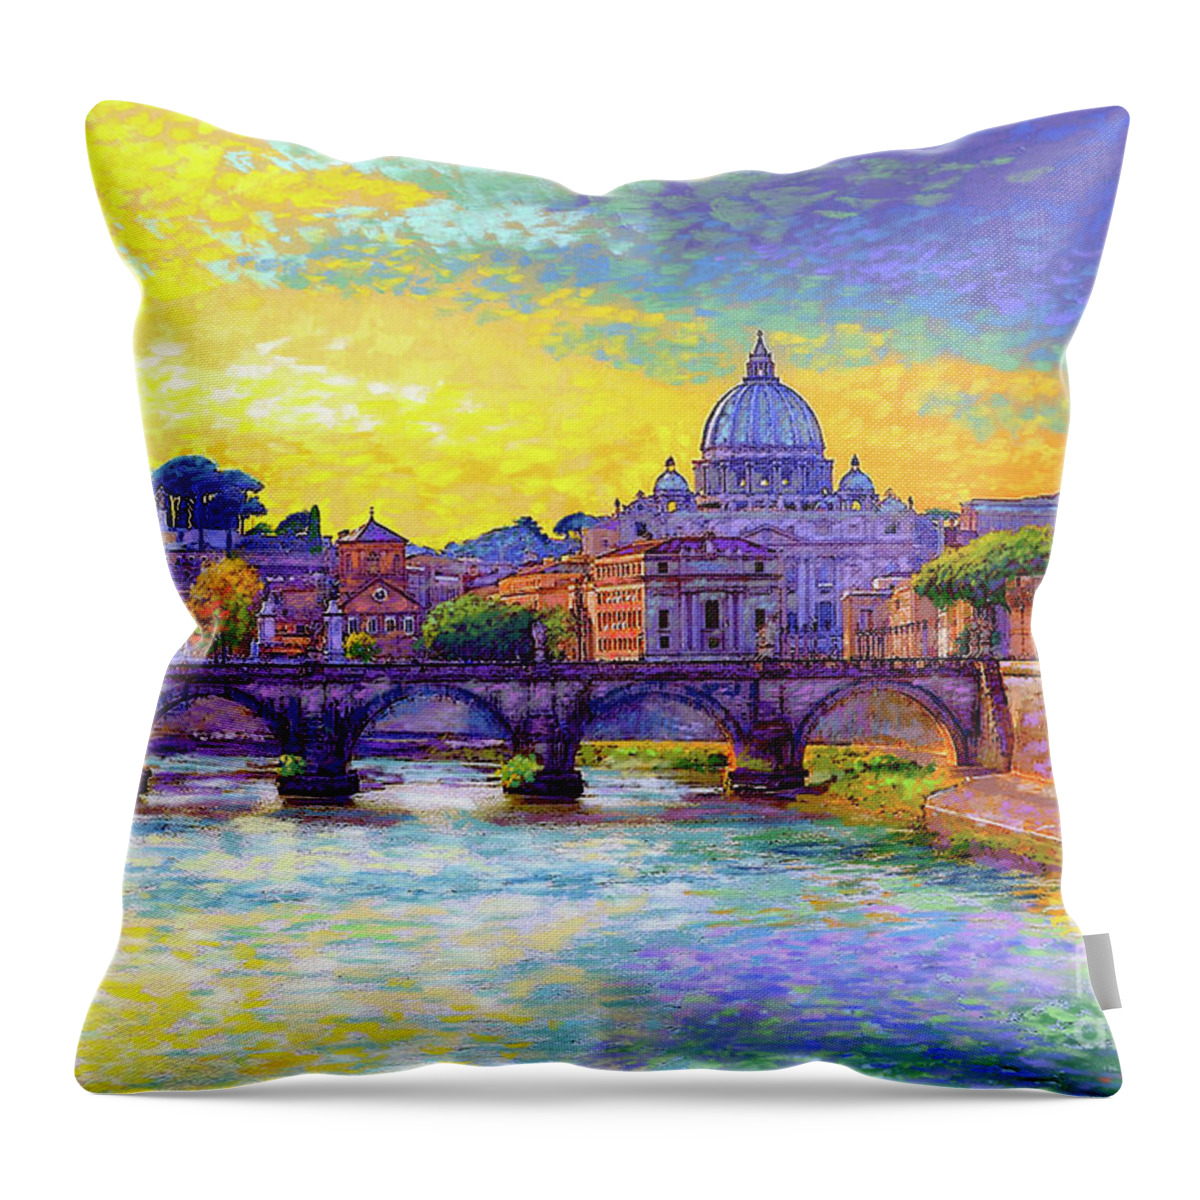 Italy Throw Pillow featuring the painting St Angelo Bridge Ponte St Angelo Rome by Jane Small